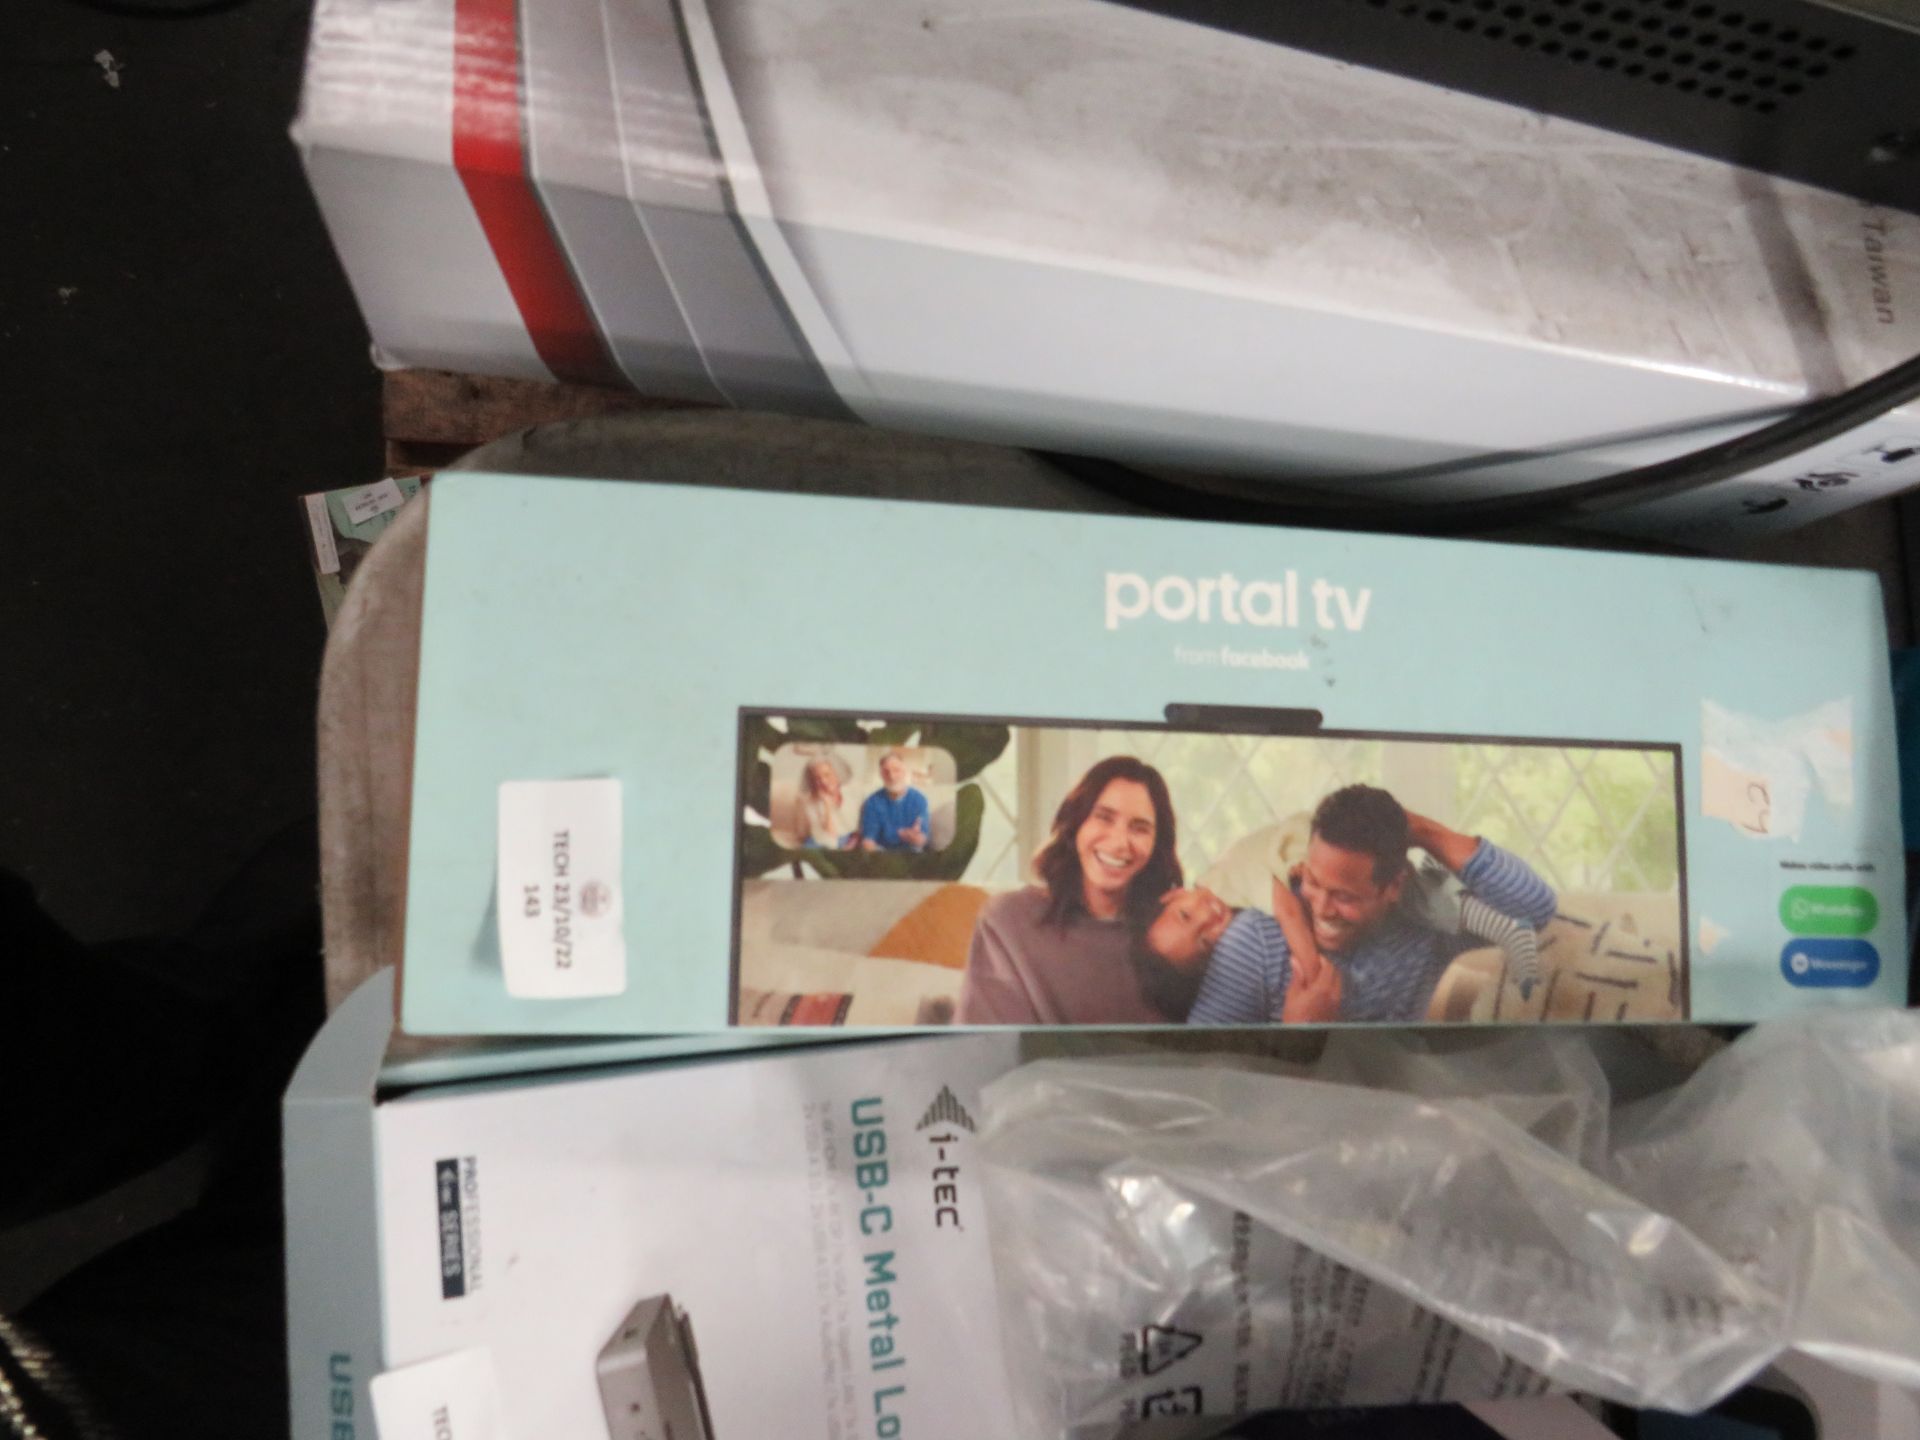 Portal TV from facebook, boxed and unchecked as would need setting up